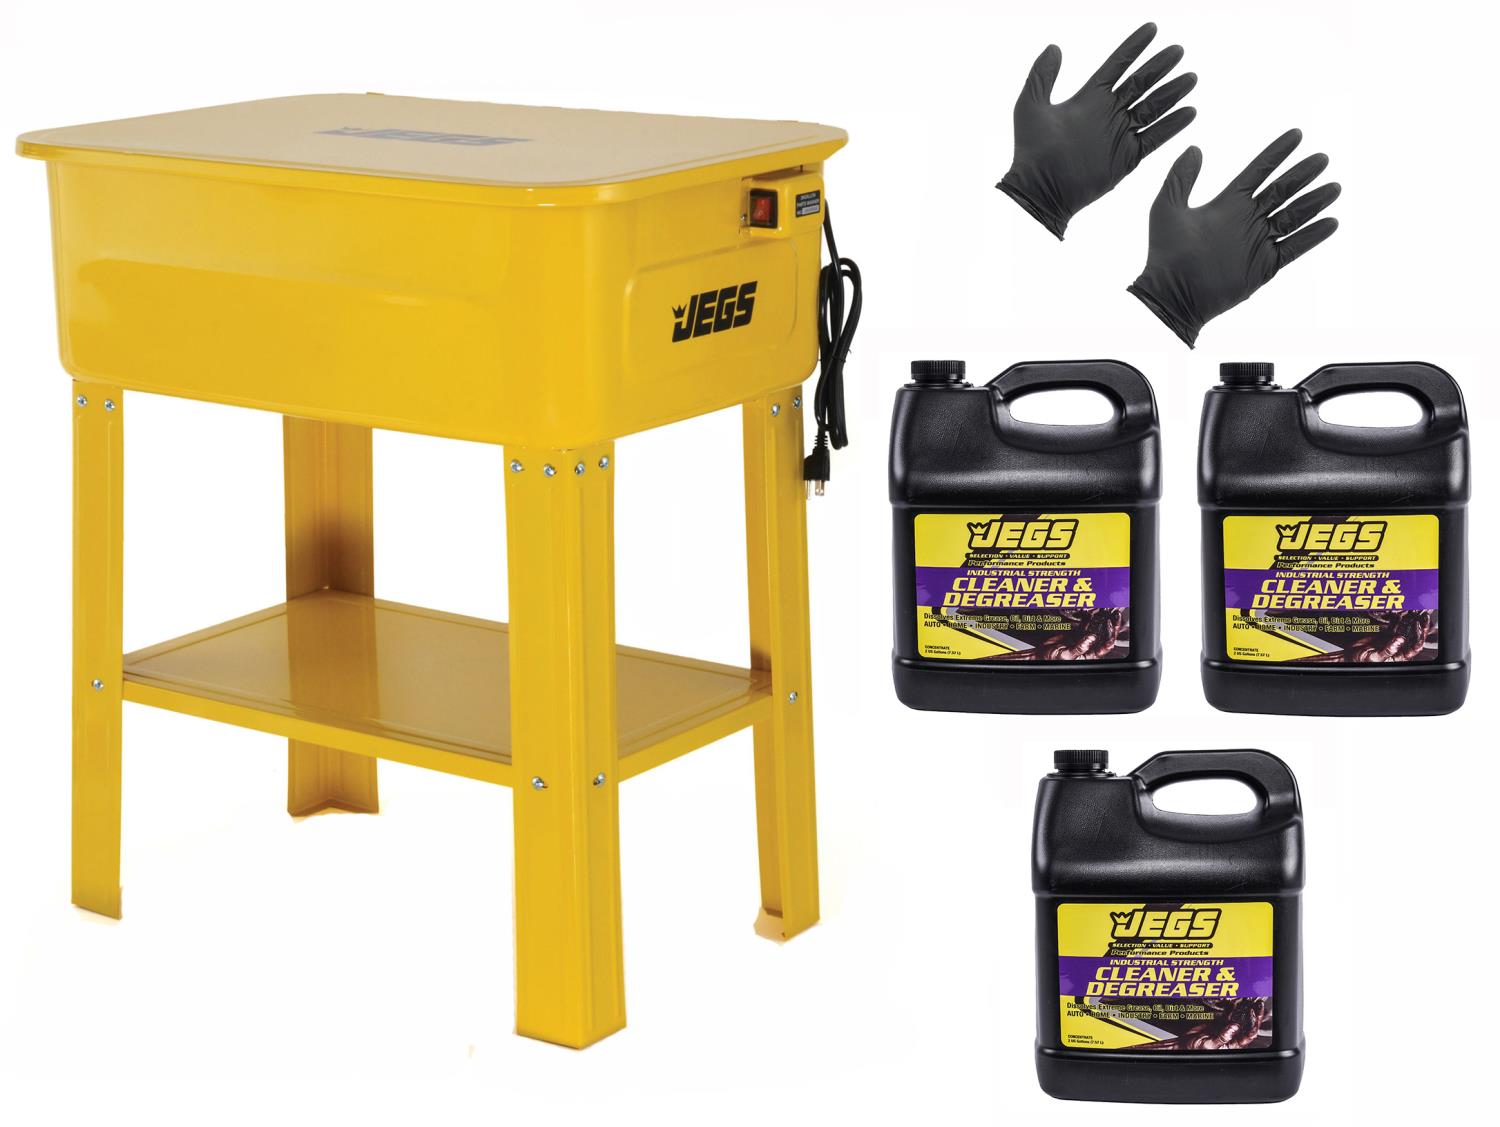 Parts Washer Kit with 3 Two Gallon Bottles of Cleaner/Degreaser & Large Gloves [20-Gallon Tank]